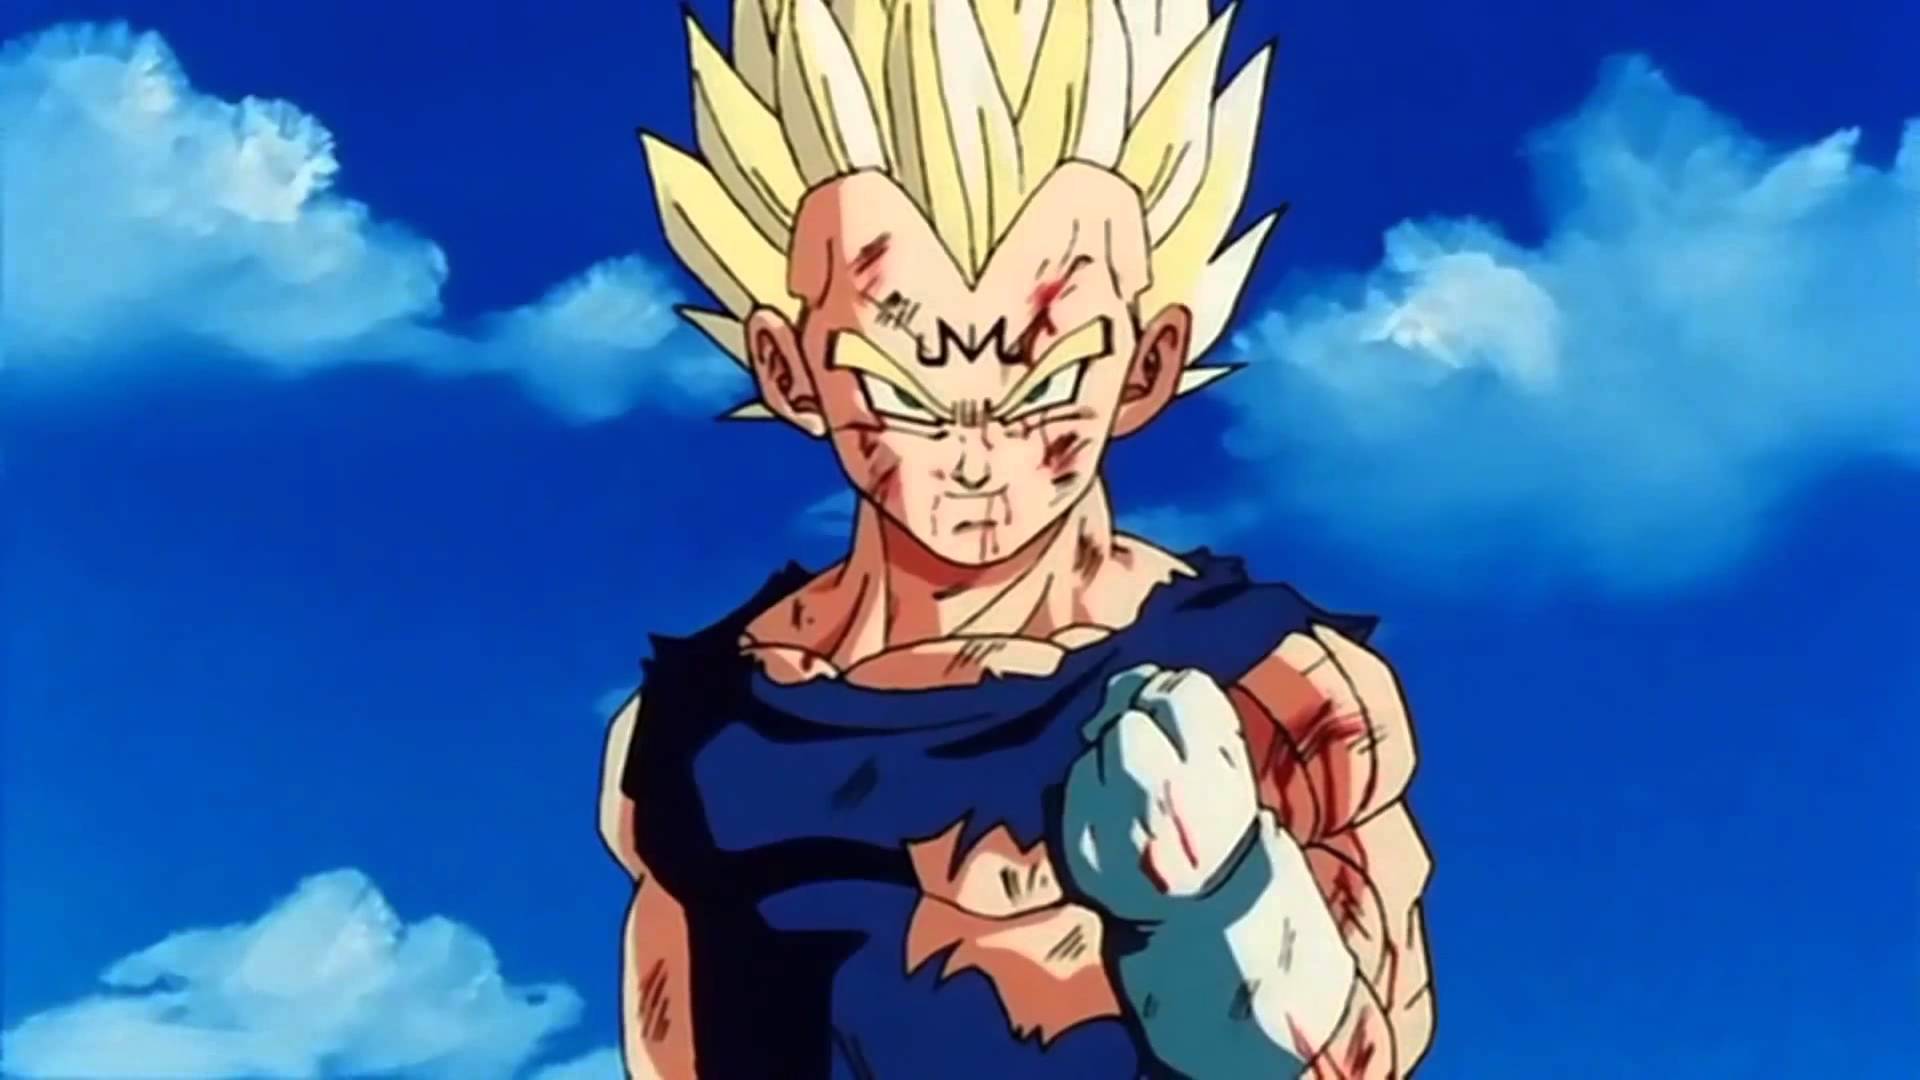 Vegeta S Final Explosion The Death Of A Warrior HD